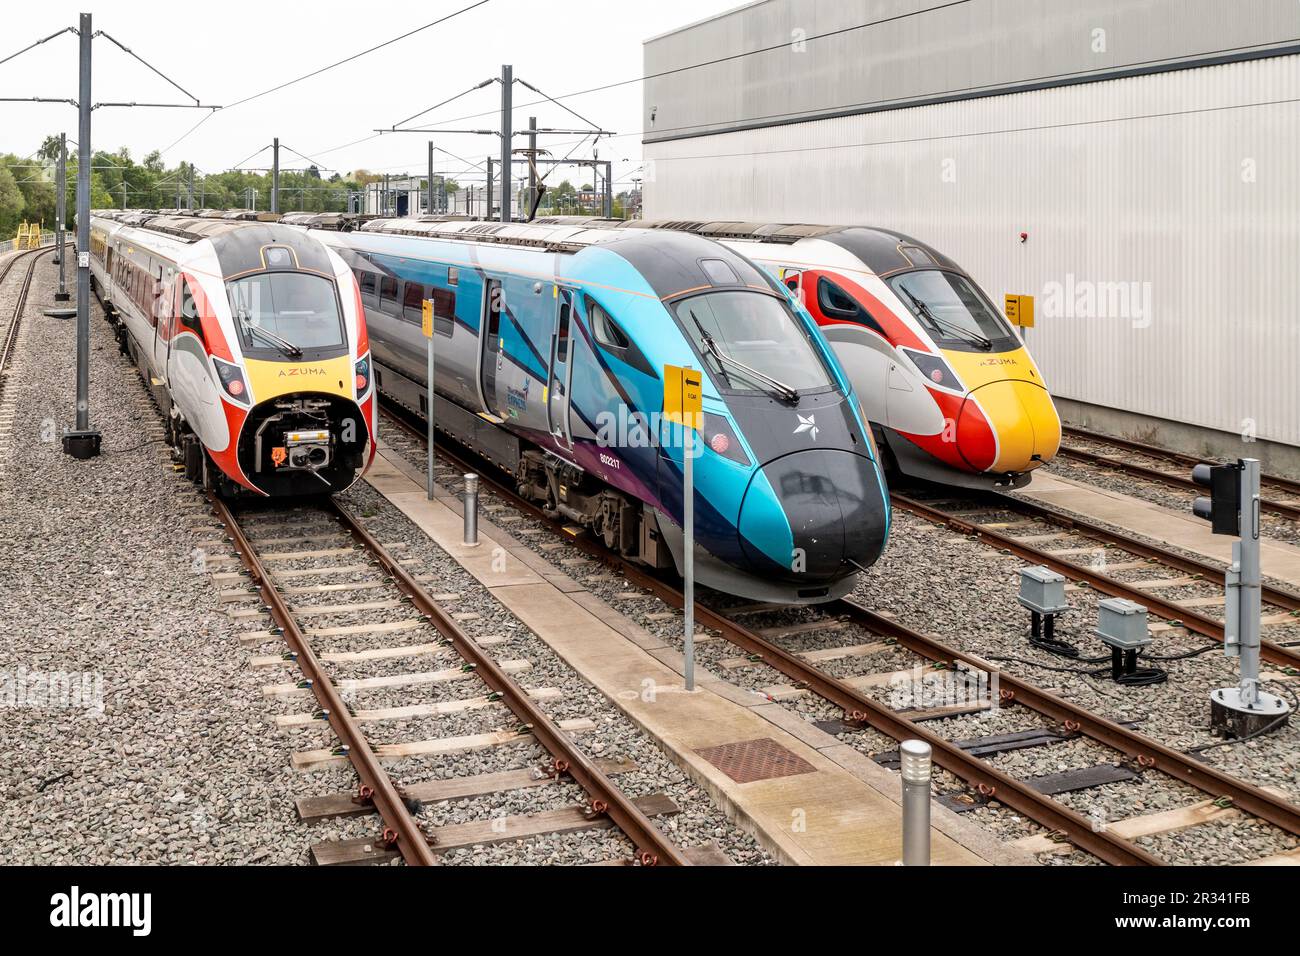 Aerial view of a fleet of Hitachi high speed passenger trains in Trans Pennine Express and LNER livery on the Hitachi Maintenance depot Stock Photo